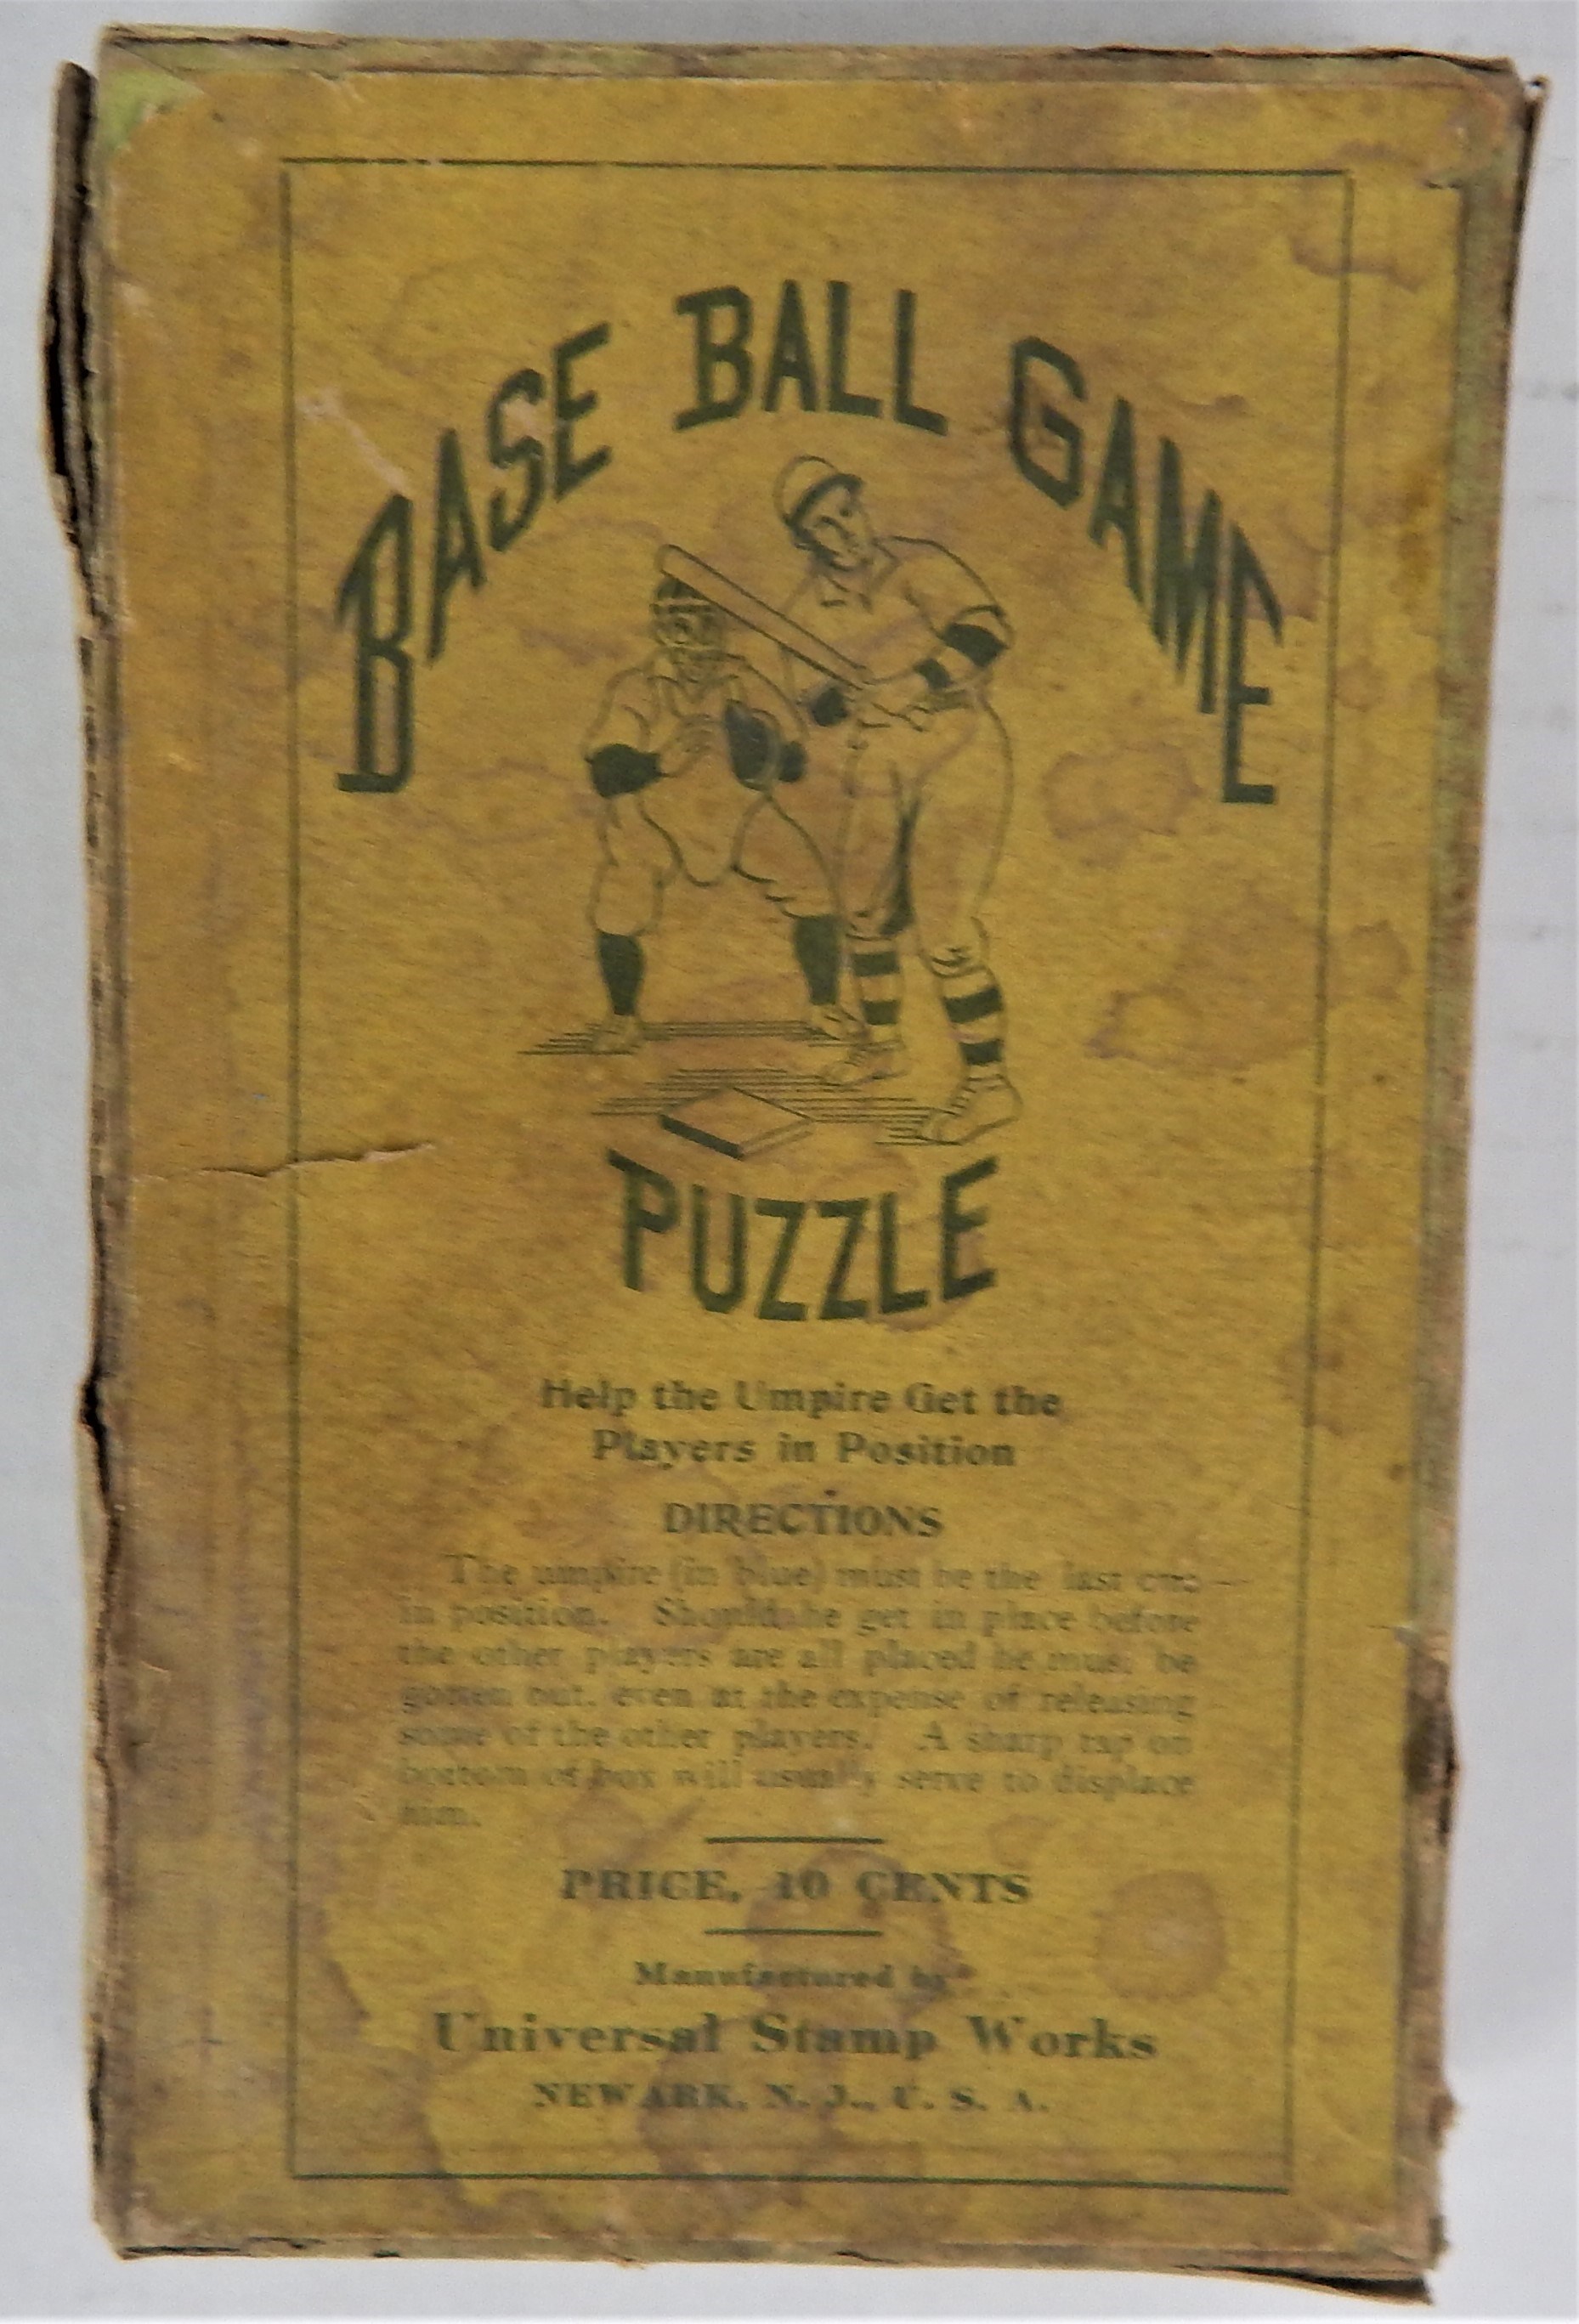 Turn of the Century Base Ball "Dexterity" Puzzle